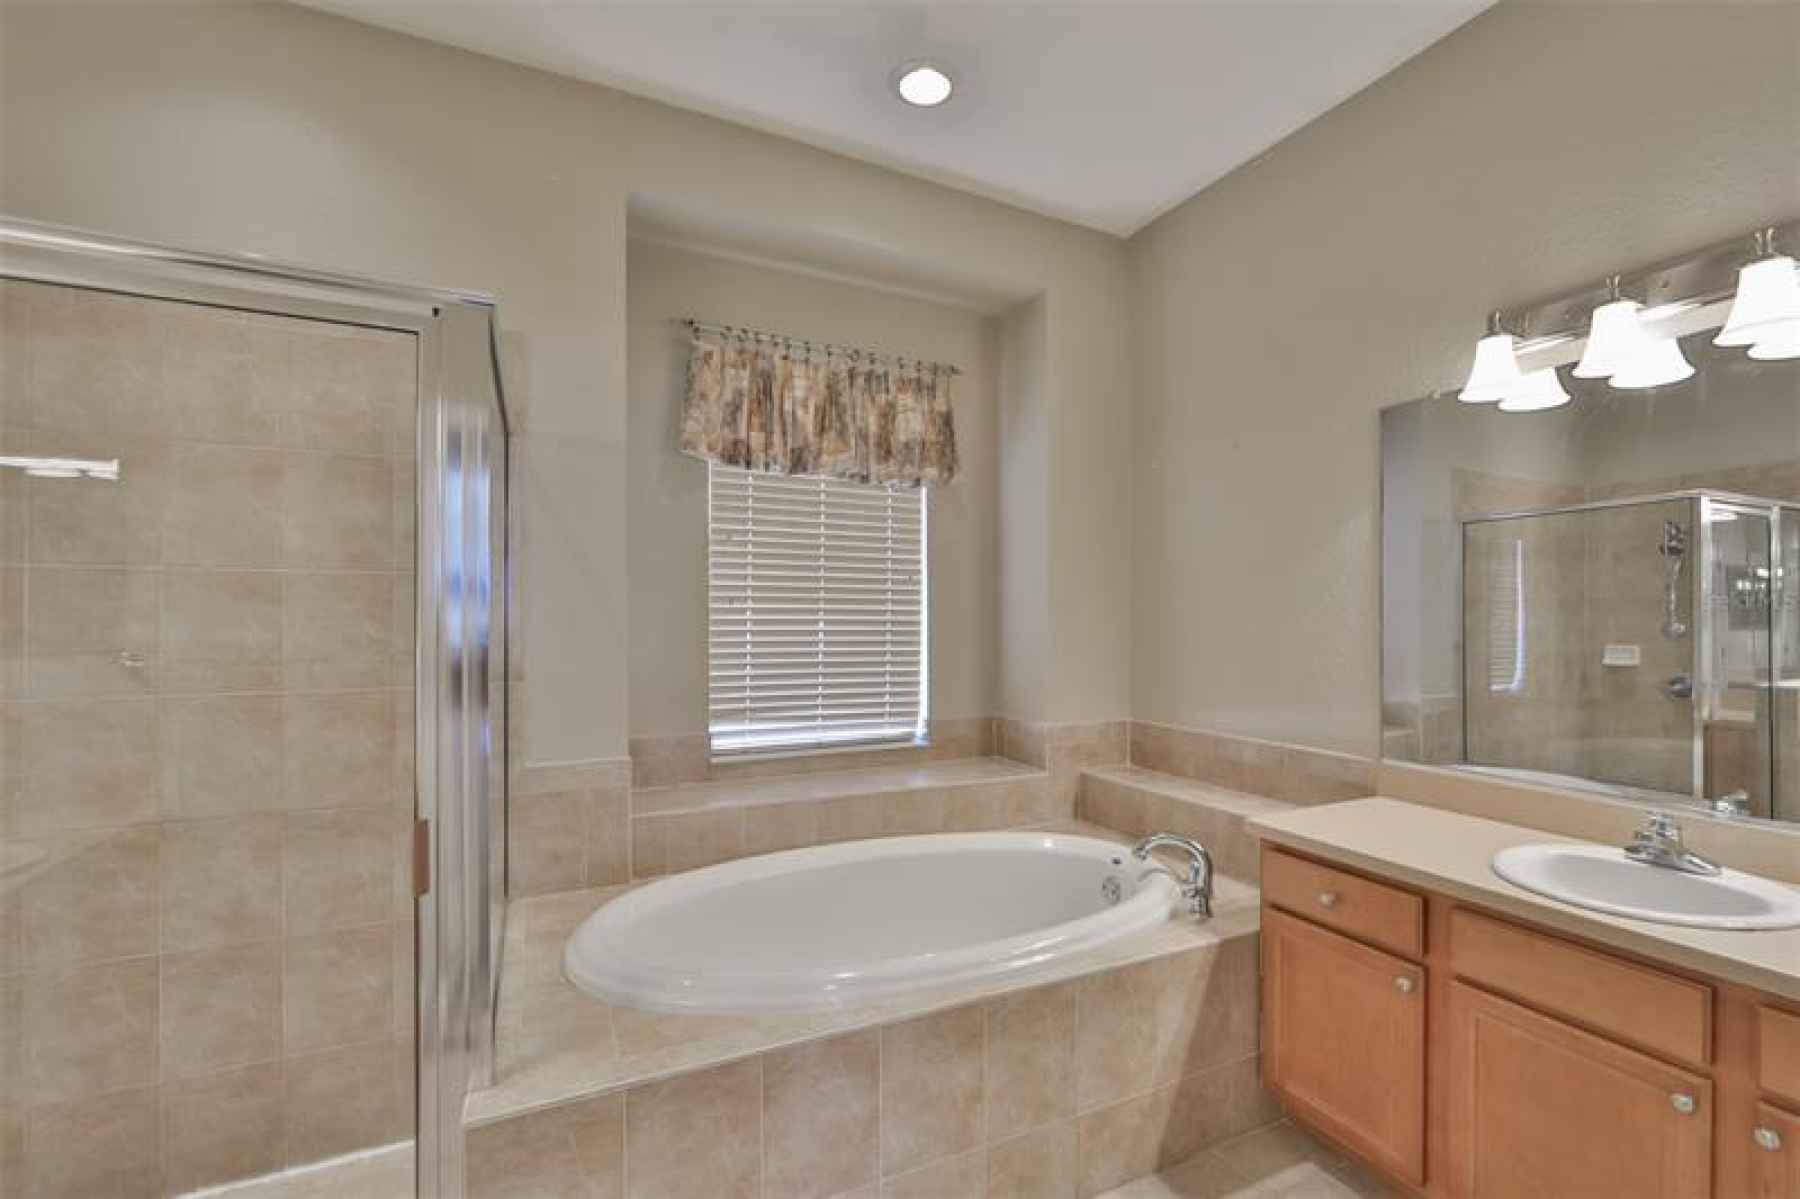 Impressive master bath with valuted ceilings, soaking tub, dual vanities and walk-in shower.